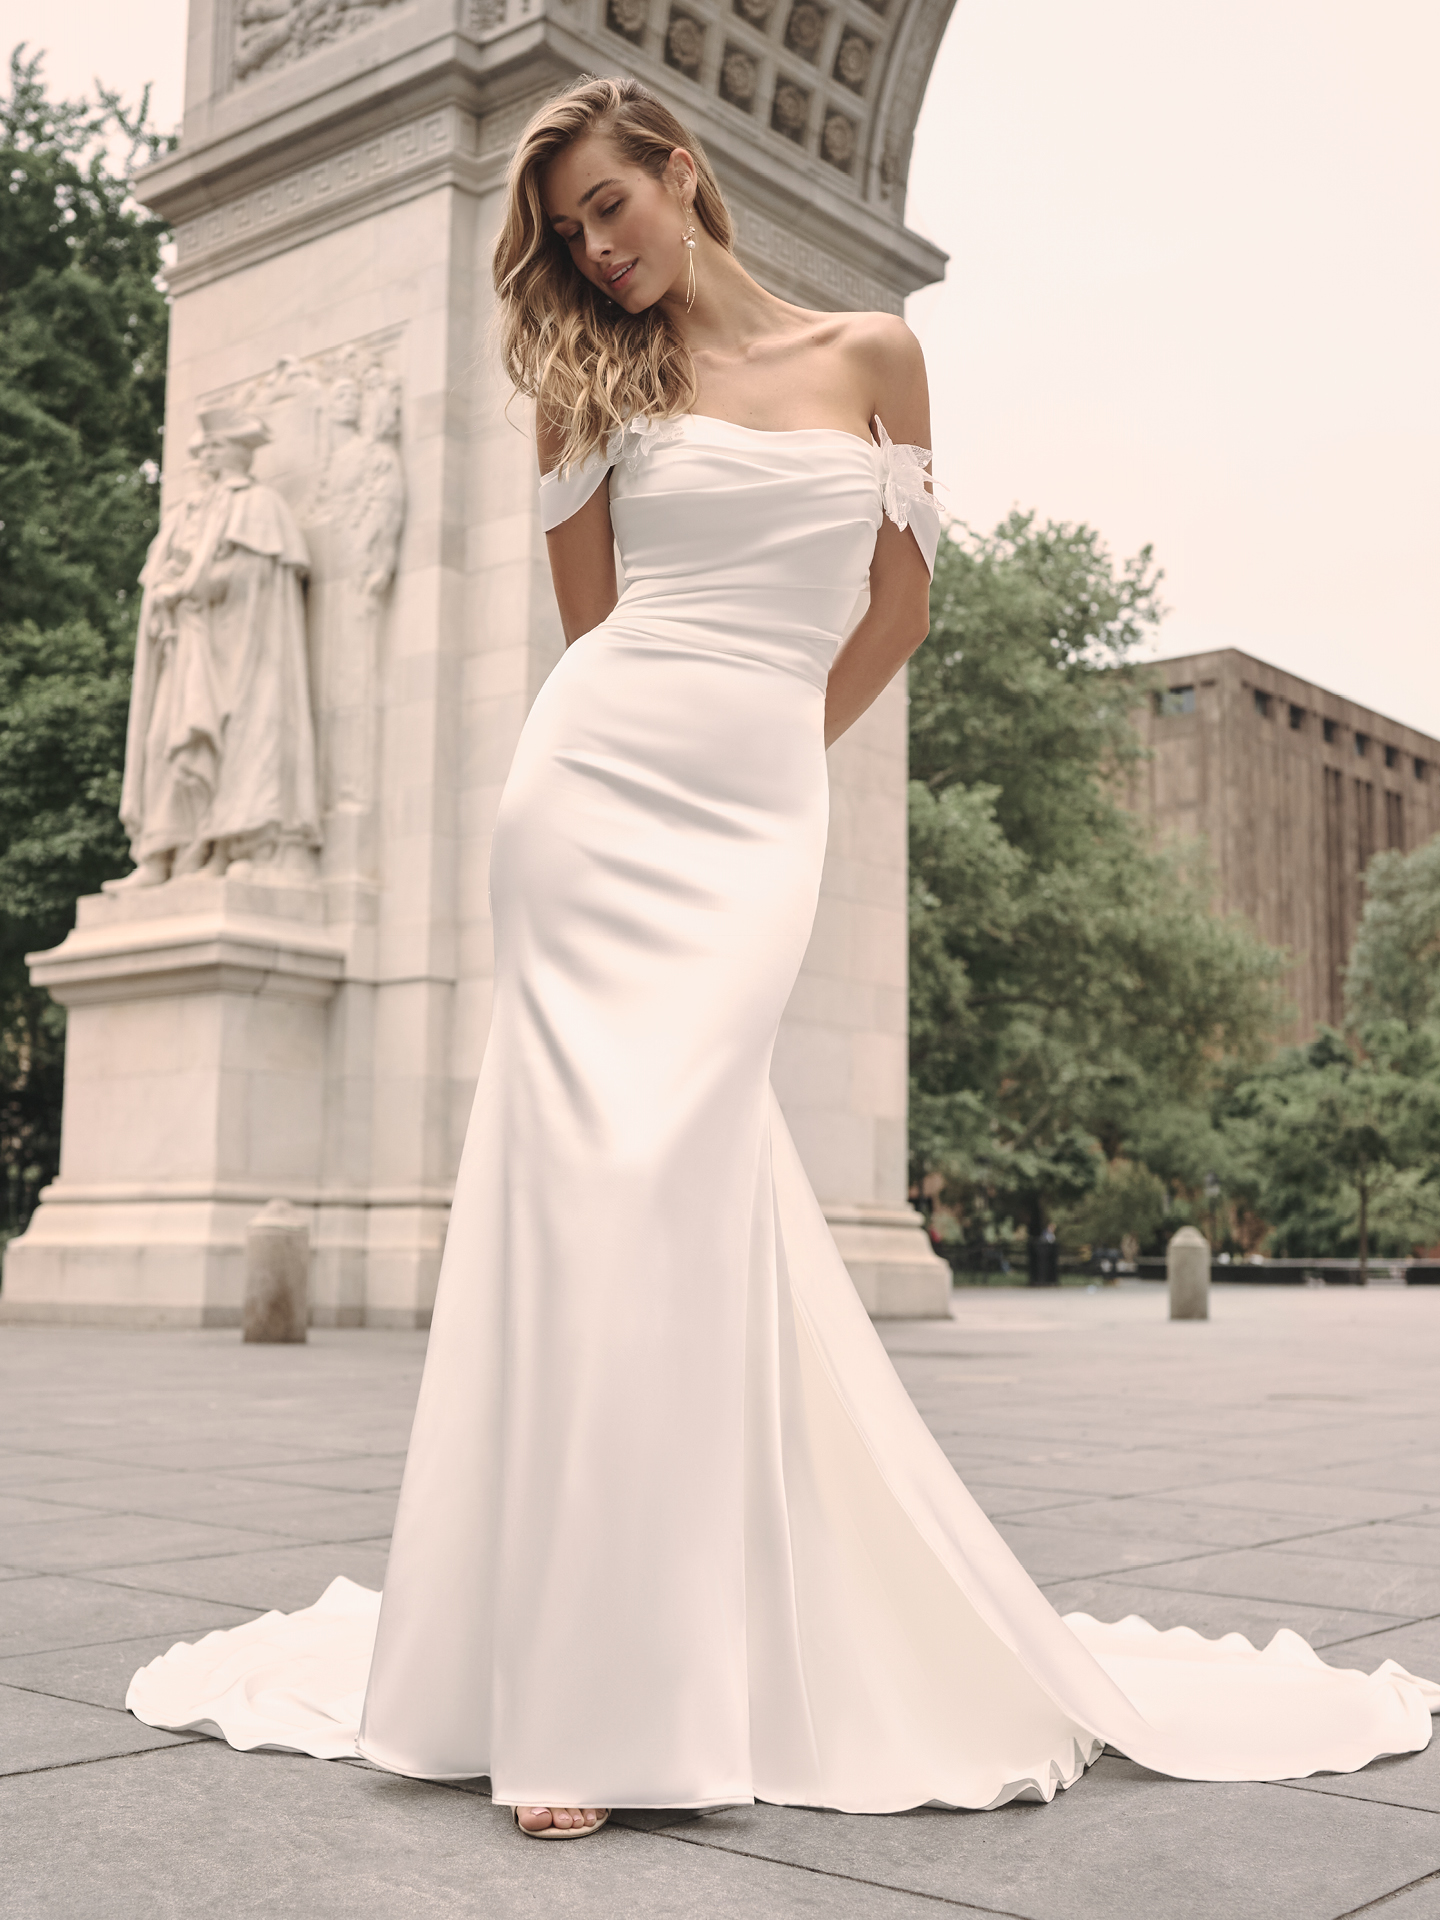 Bride In Satin Off-The-Shoulder Wedding Dress Called Cameron By Maggie Sottero